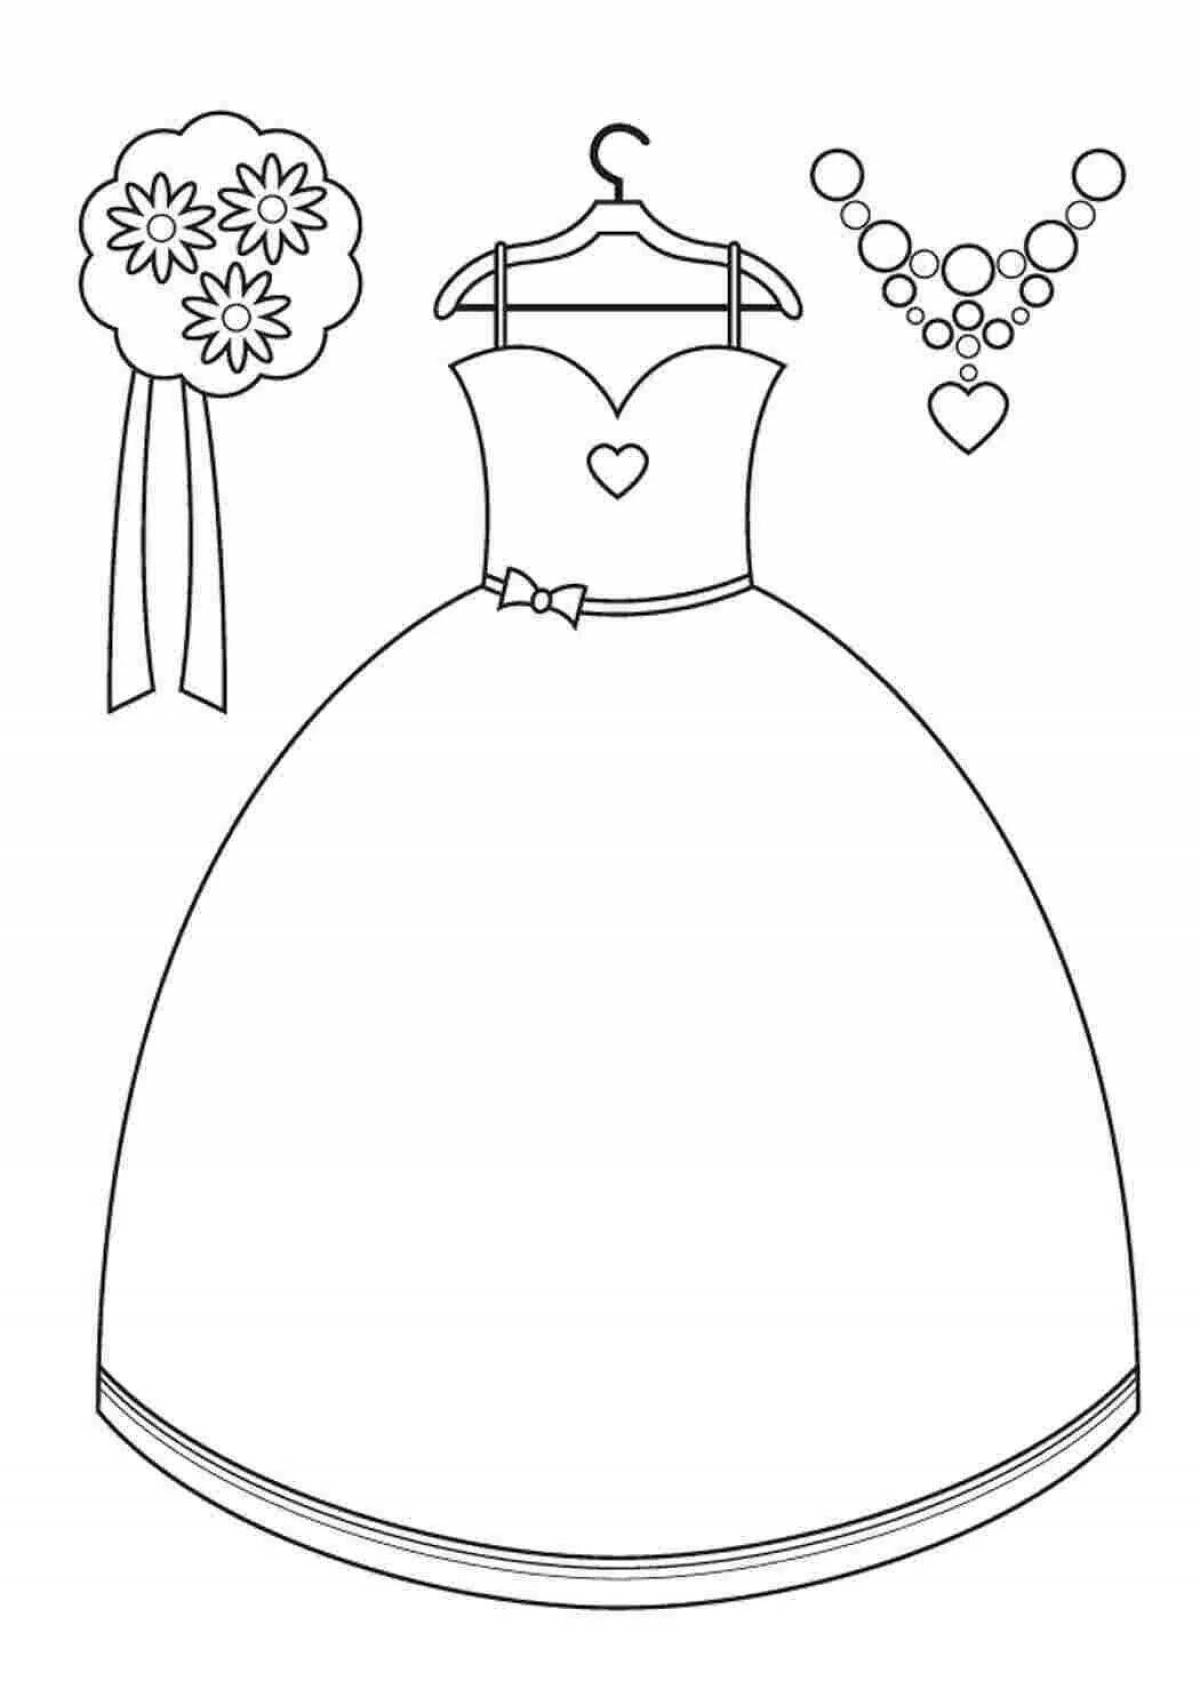 Coloring book perfect dress for kids